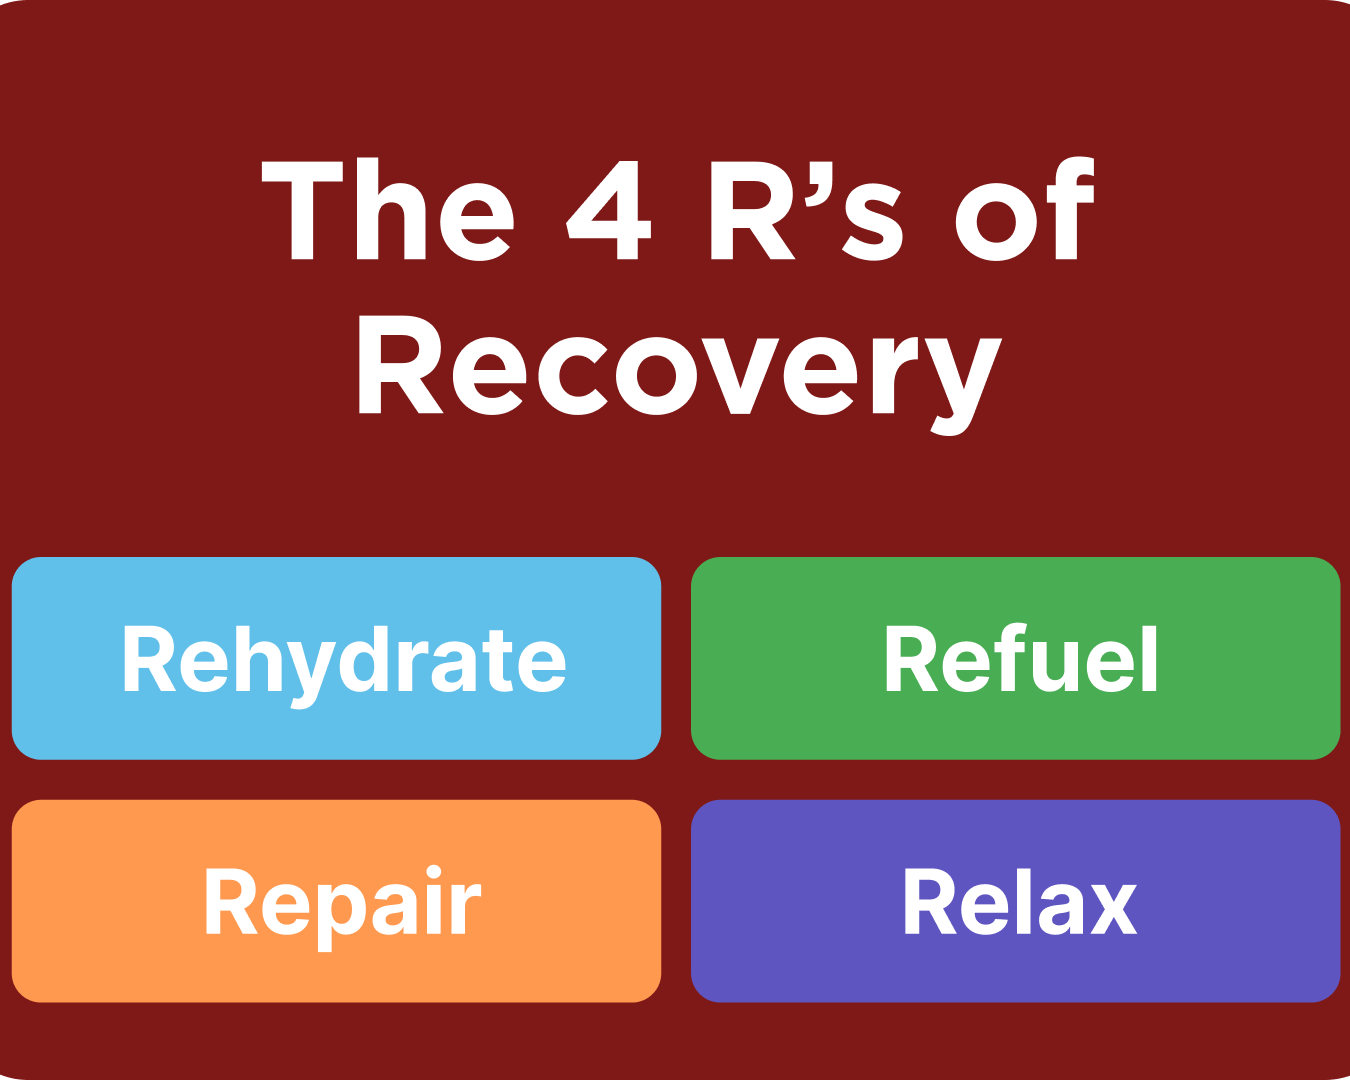 The Four R's of recovery are Rehydrate, Refuel, Repair, and Relax.